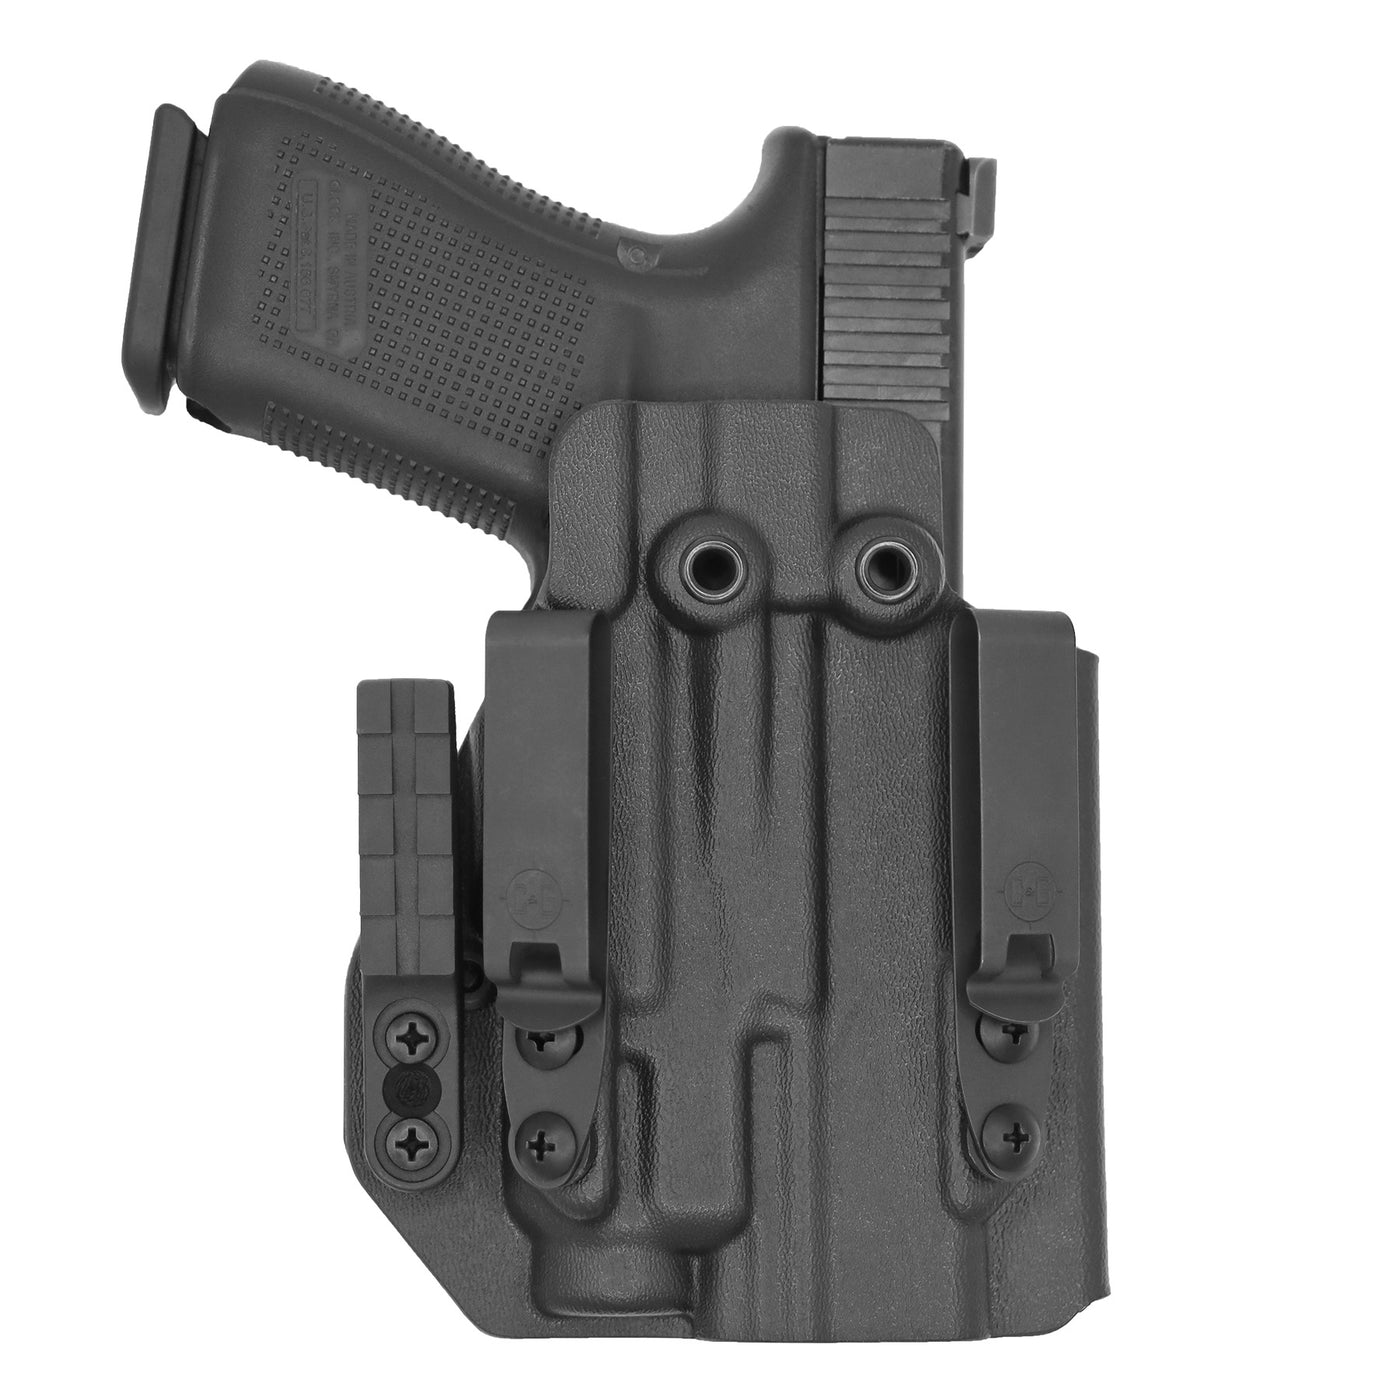 C&G Holsters custom IWB ALPHA UPGRADE Tactical Glock 20/21 Streamlight TLR7/a in holstered position